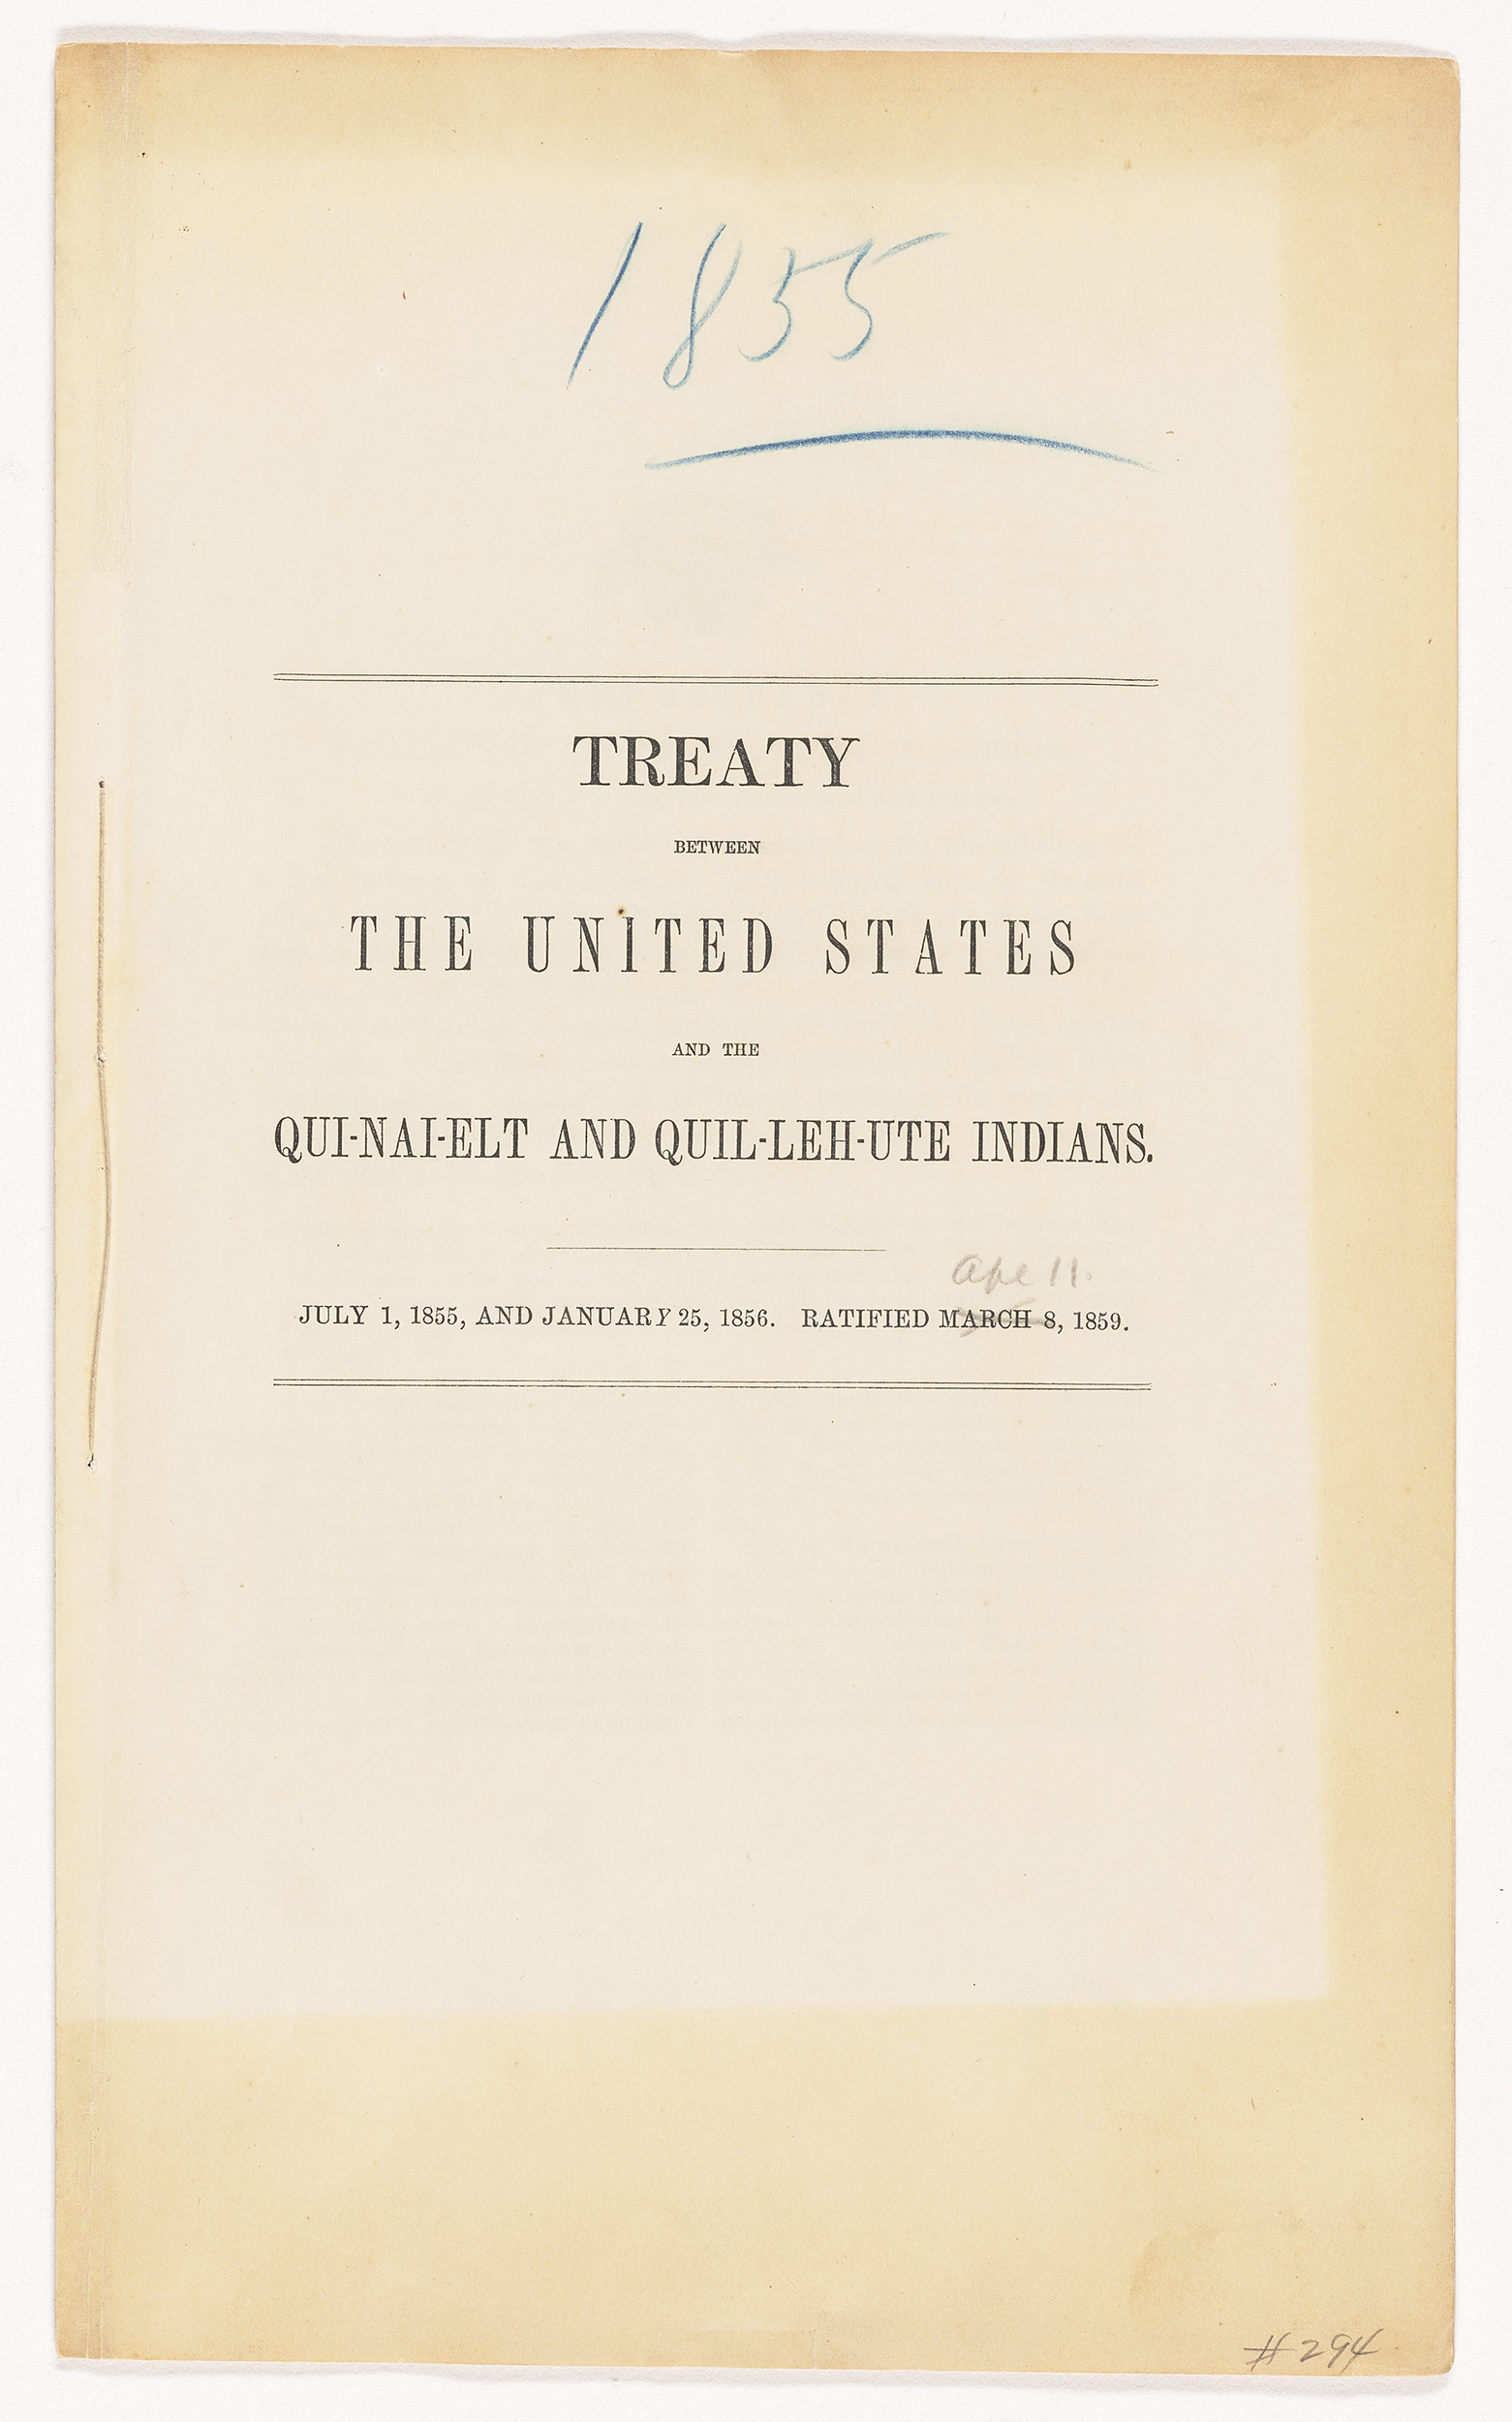 Photo of a document reads: "Treaty between the United States and the Qui-nai-elt and Quil-leh-ute Indians." — "July 1, 1855, and January 25, 1856. Ratified Apr. 11, 1859"